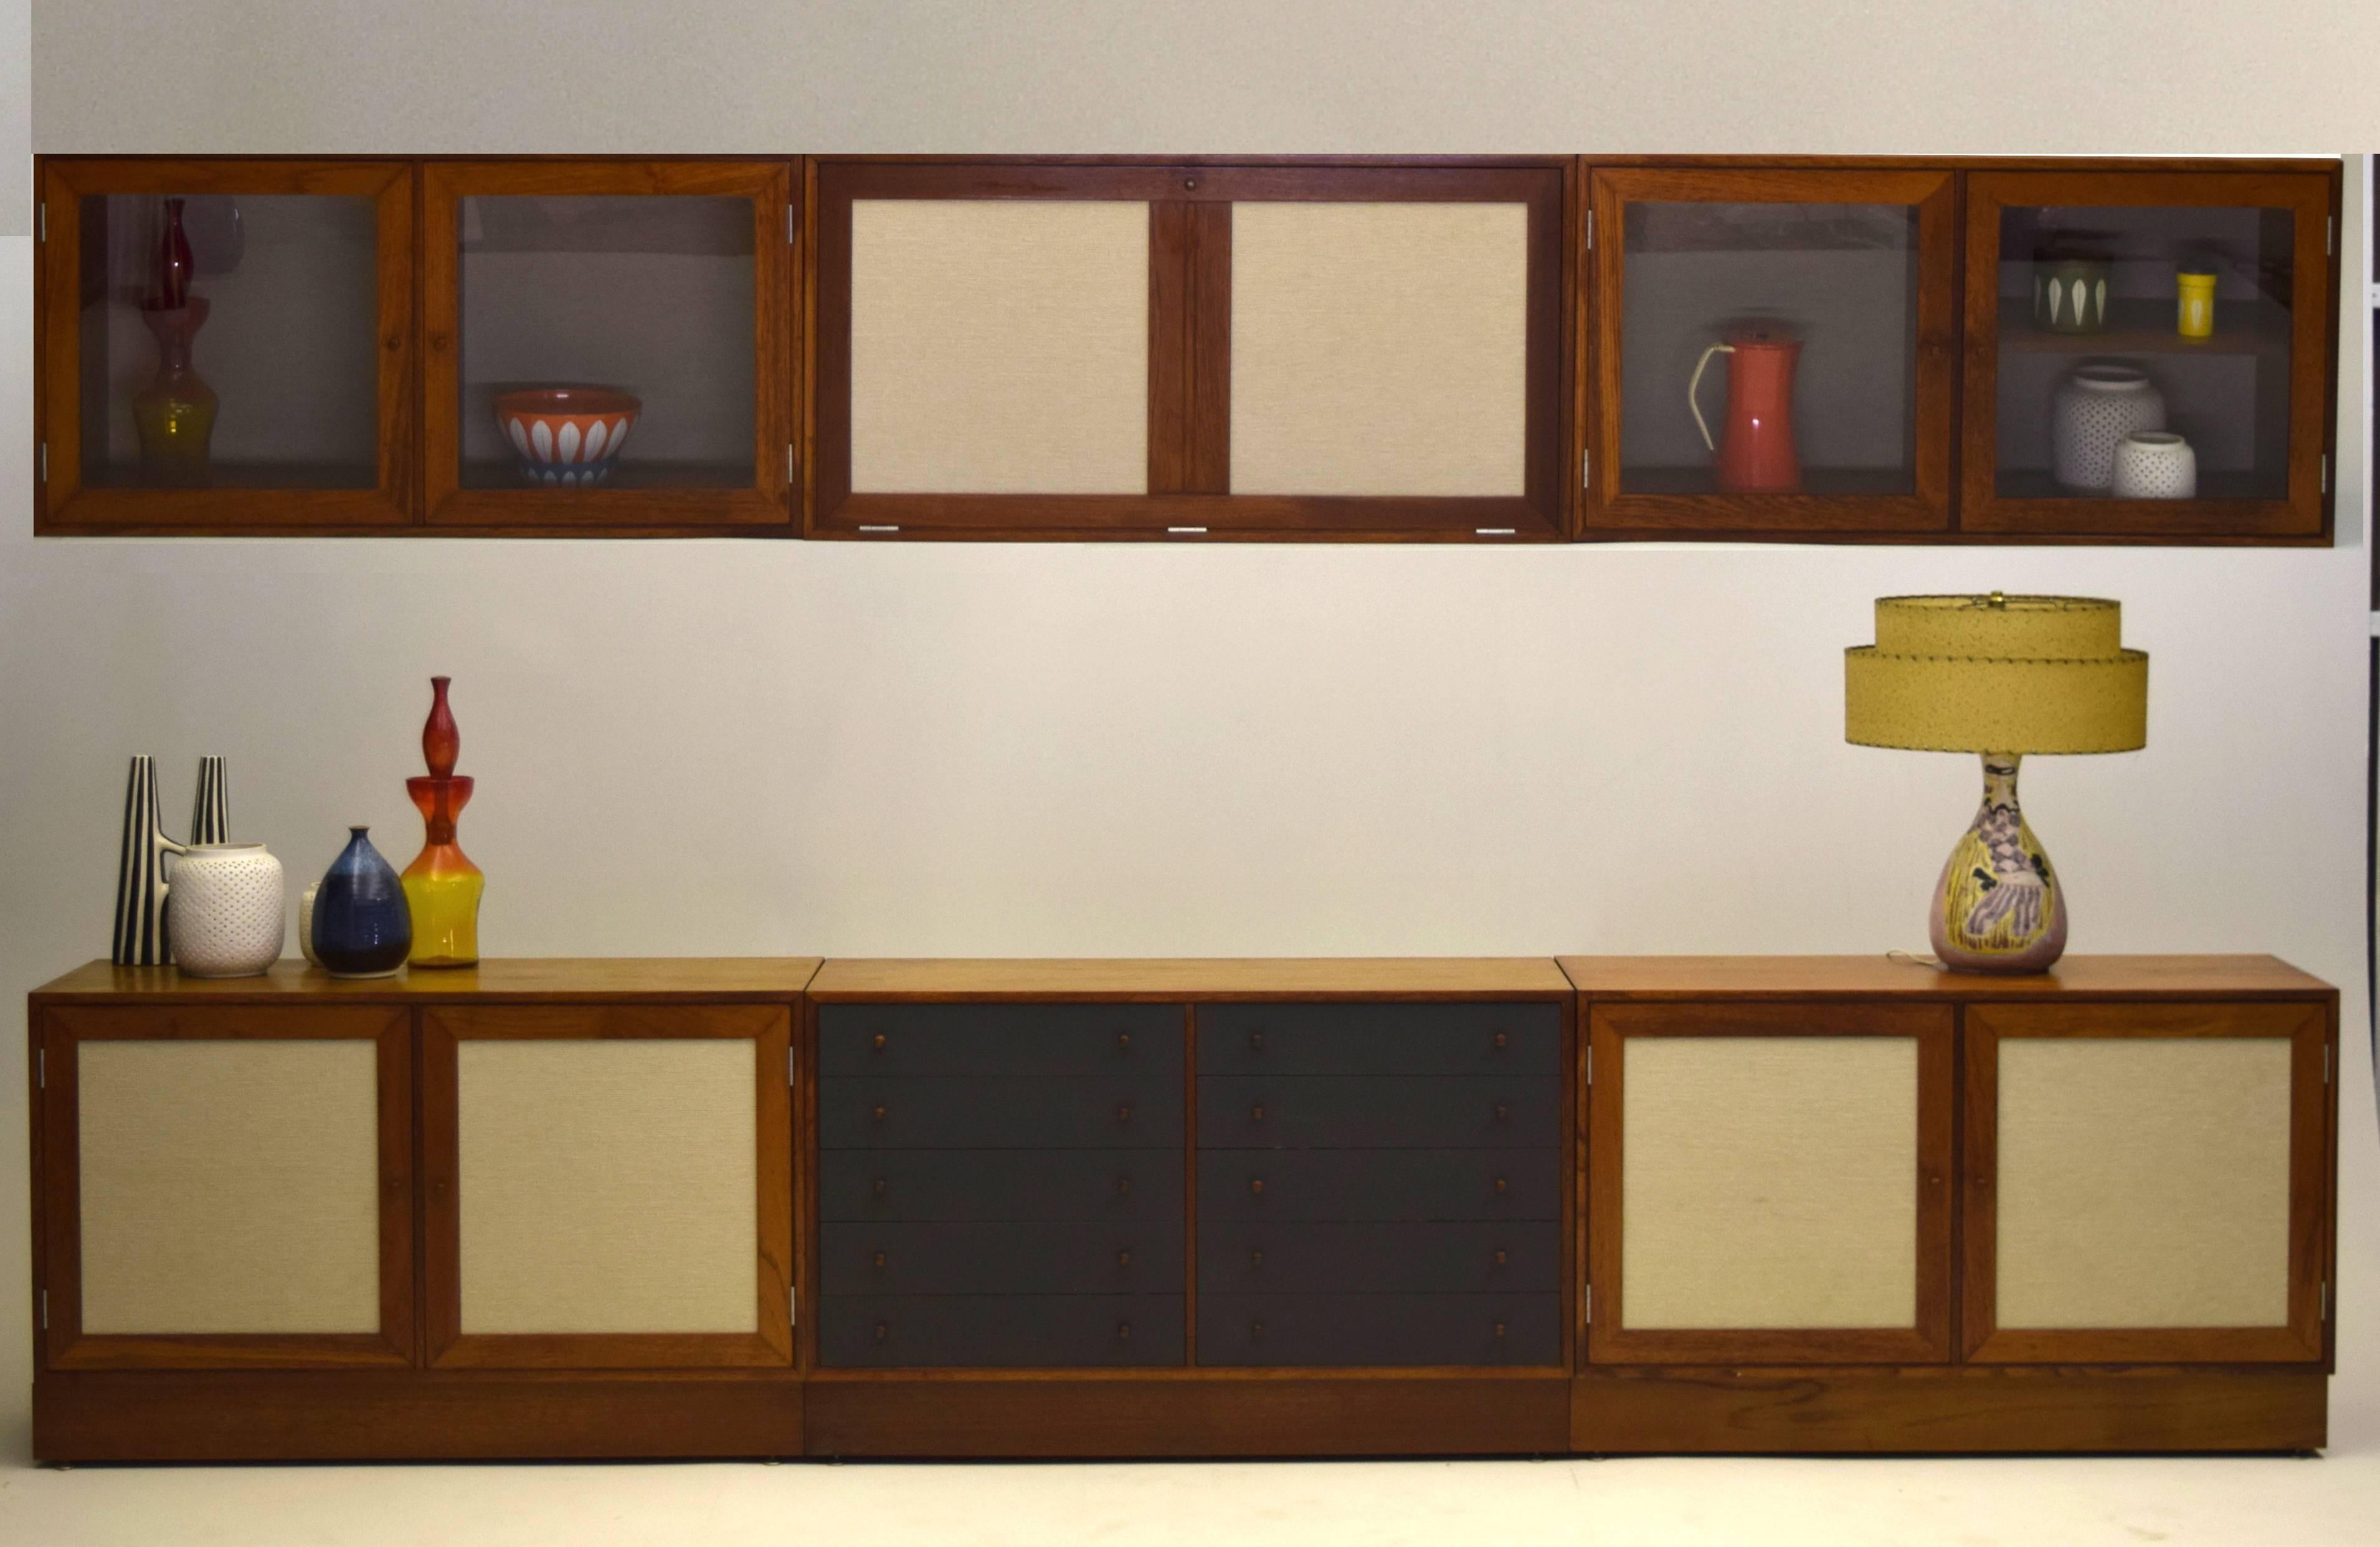 This listing is for all pieces photographed (six shelf units with three plinth bases).

One of three different listings we have of the same series by Rud Thygesen and Johnny Sorensen dated to the late 1960s. 

Overview:

These were not offered